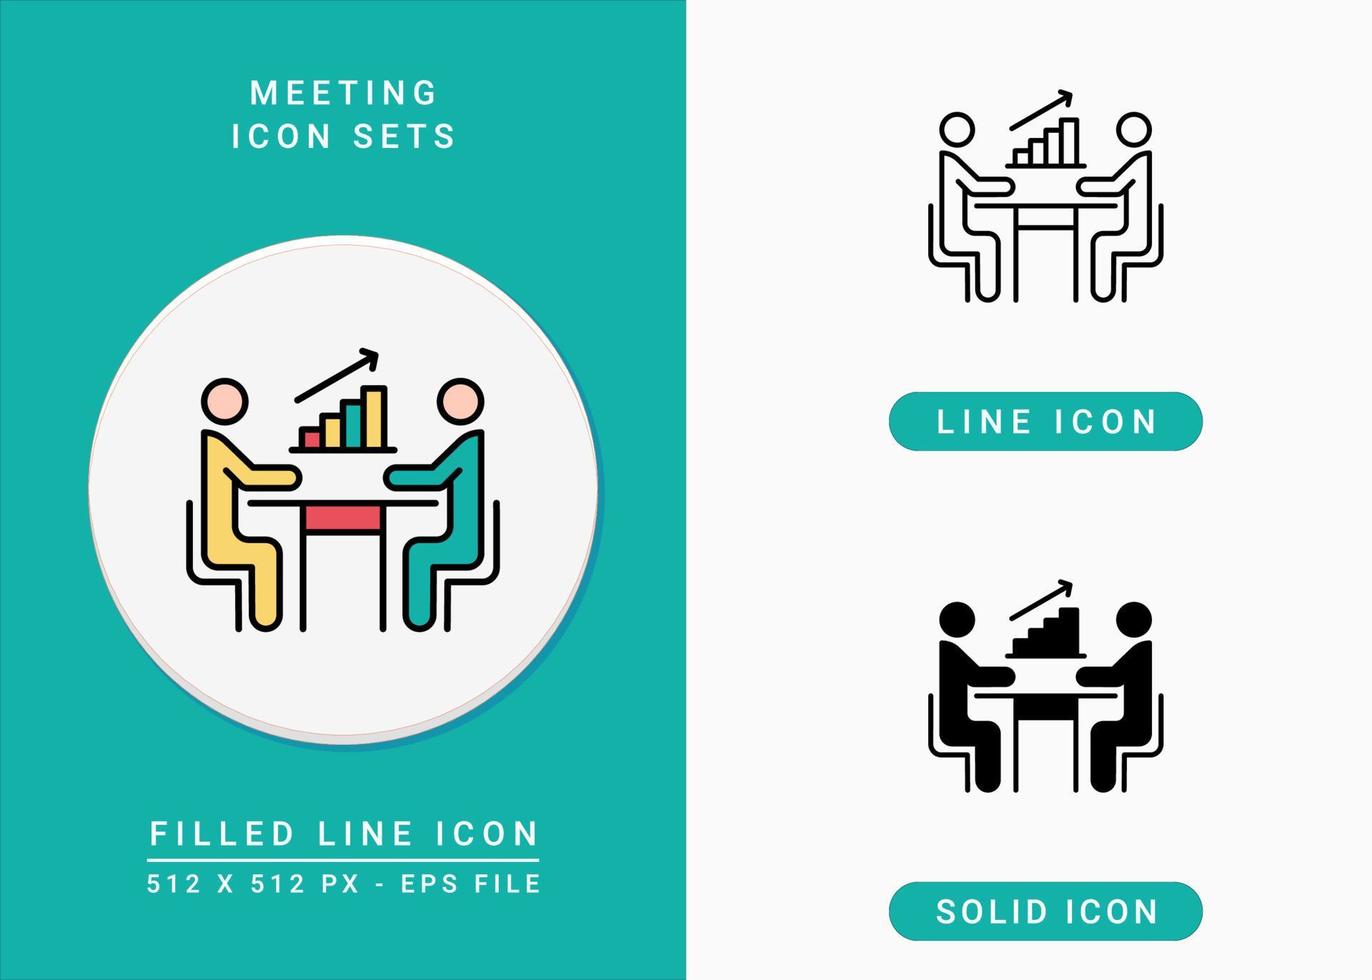 Meeting icons set vector illustration with solid icon line style. People collaboration concept. Editable stroke icon on isolated background for web design, infographic and UI mobile app.